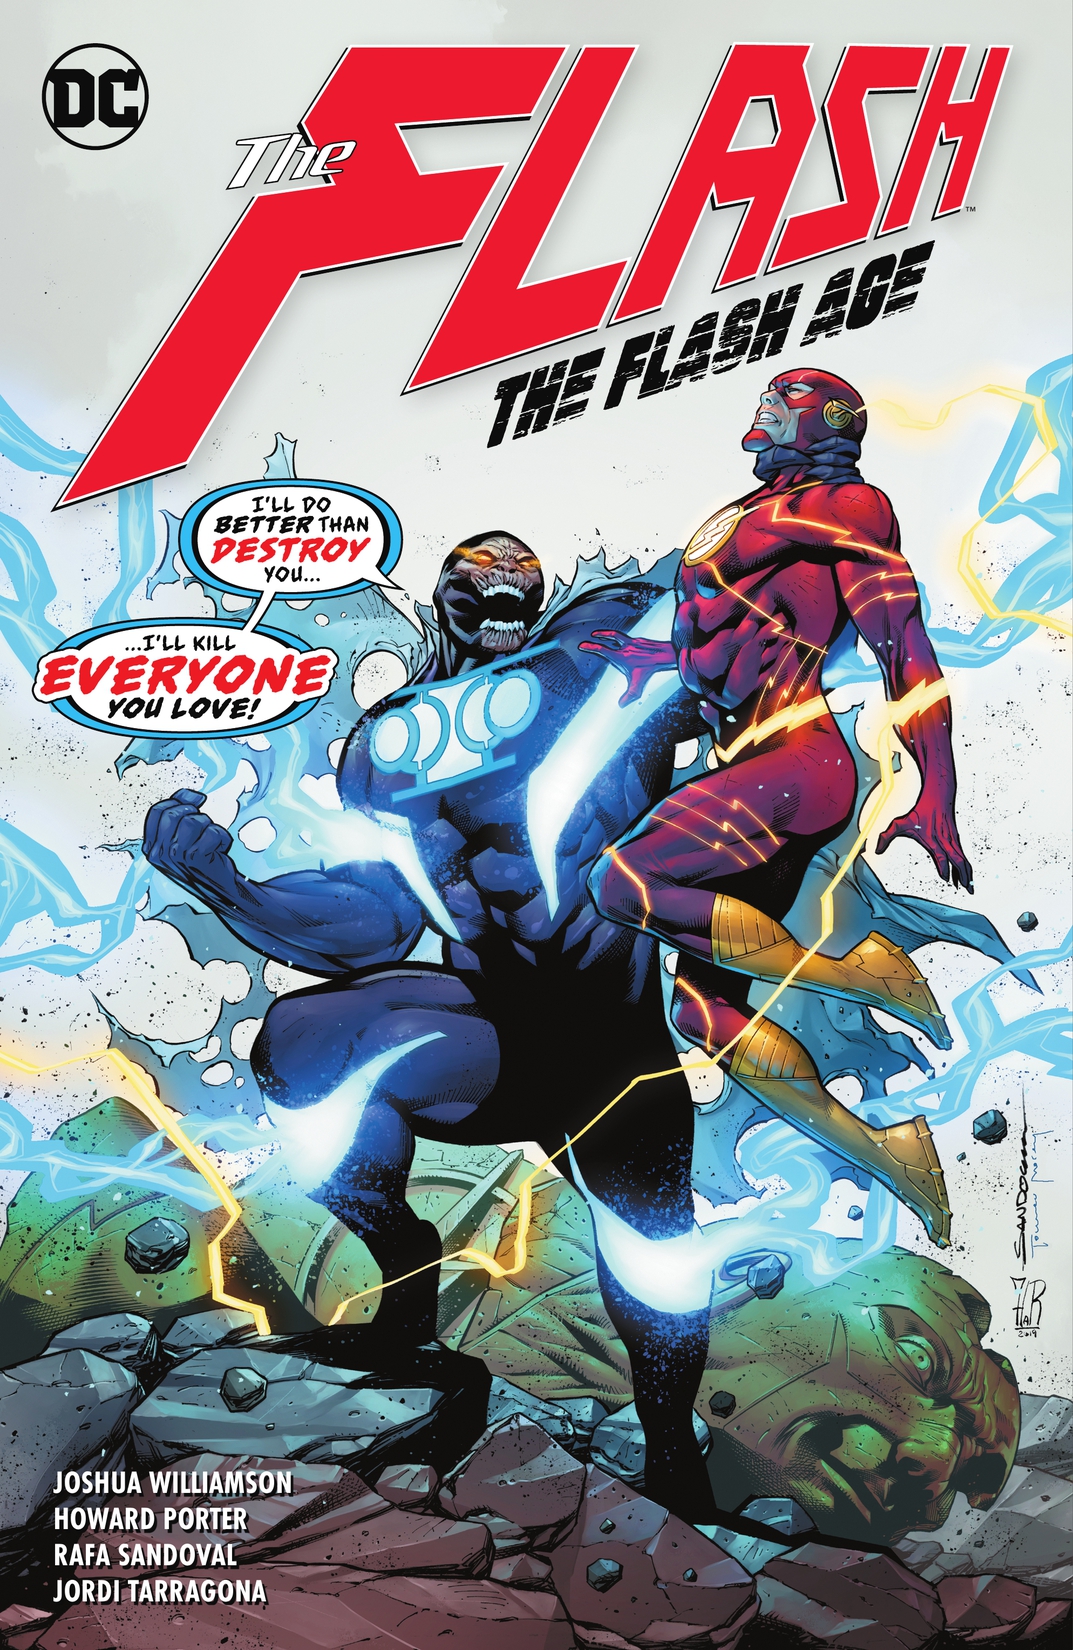 The Flash Vol. 14: The Flash Age preview images